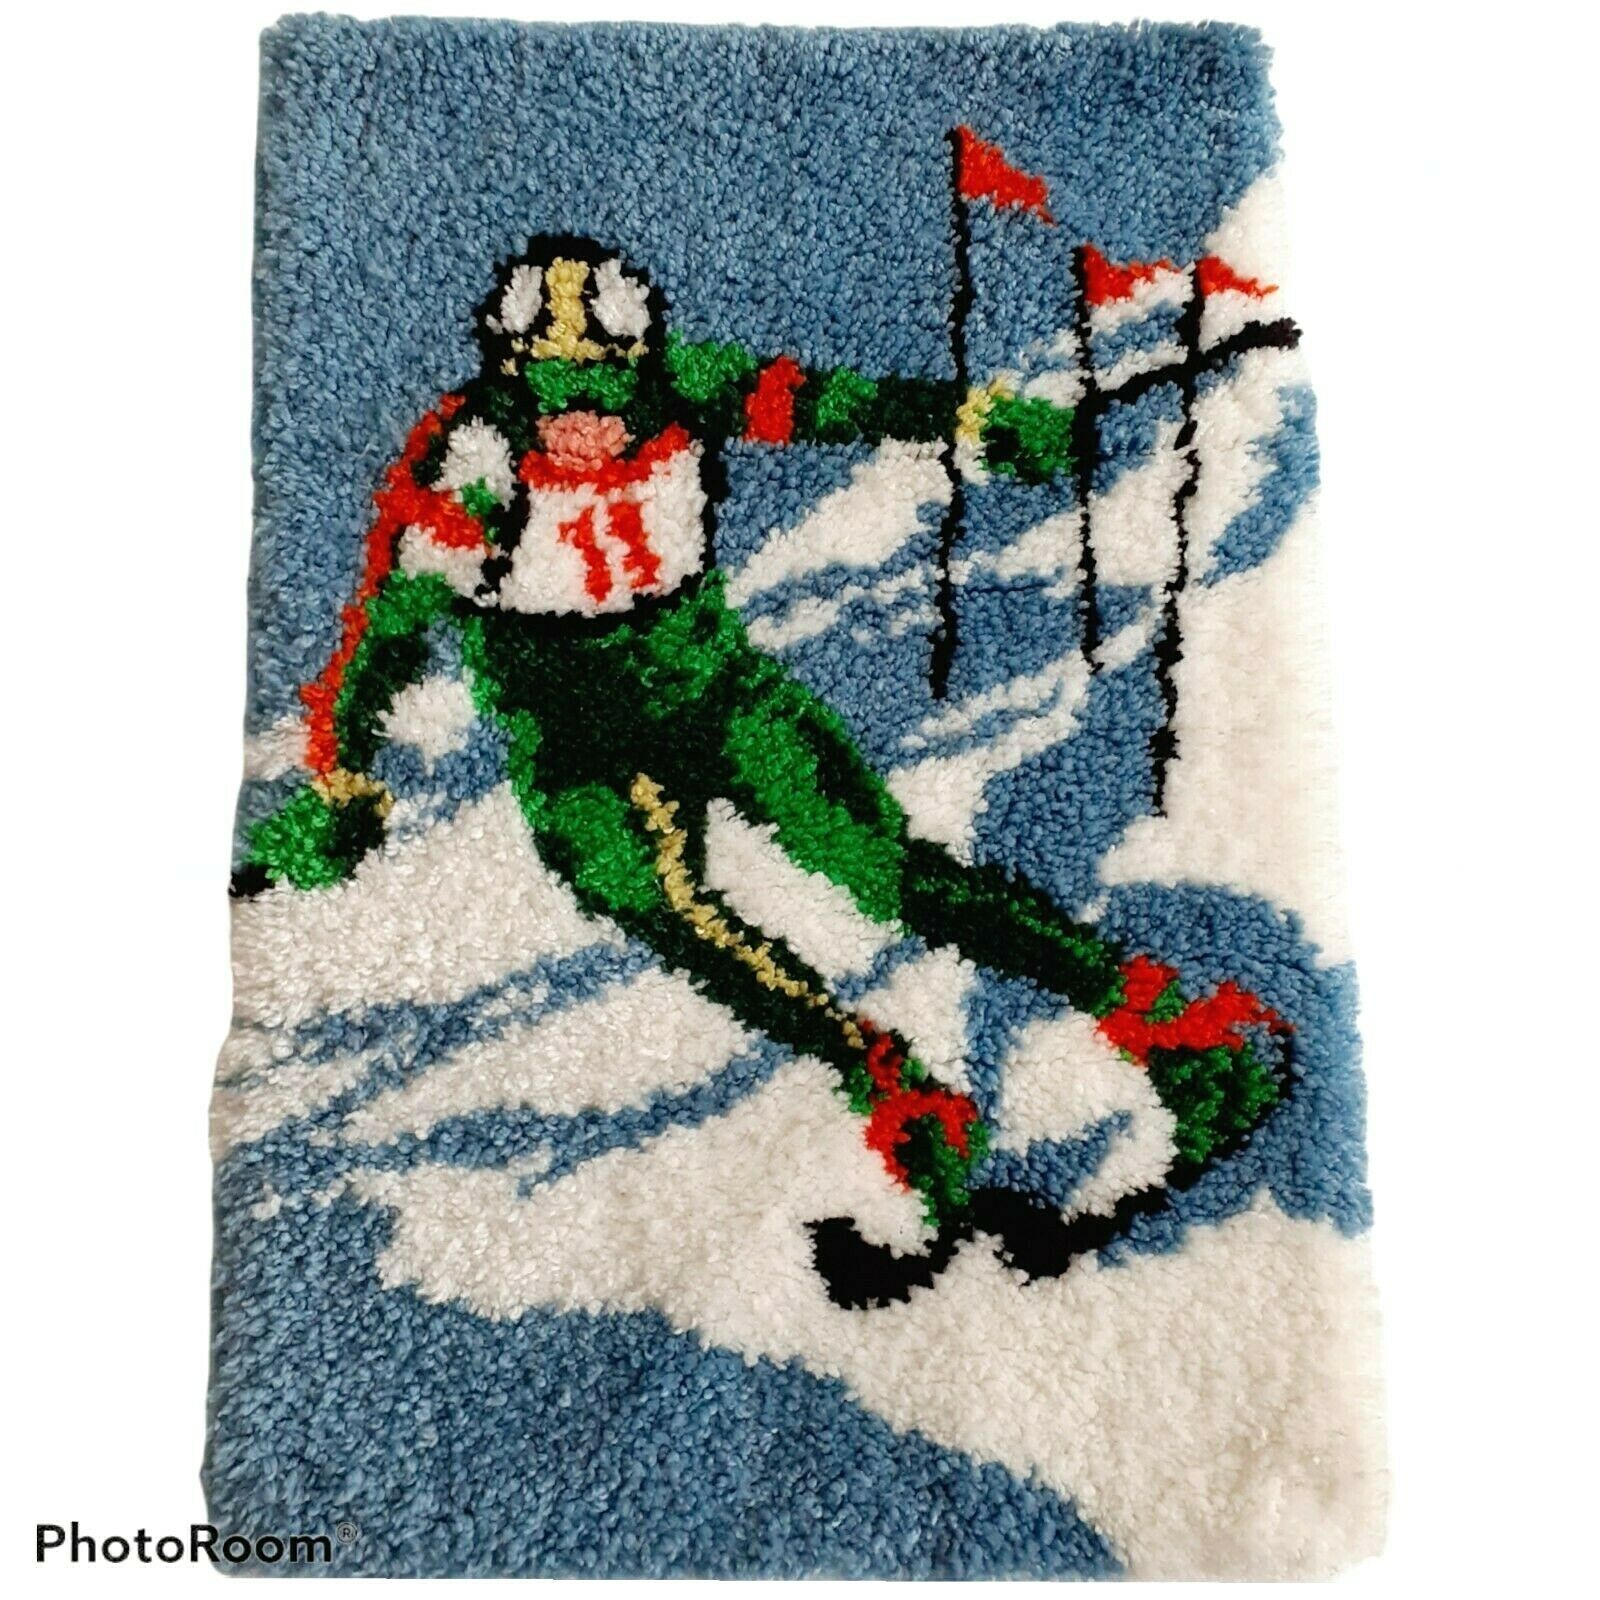 Downhill Ski Racing Latch Hook Rug / Wall Hanging, Completed 24x34" Blue Green +